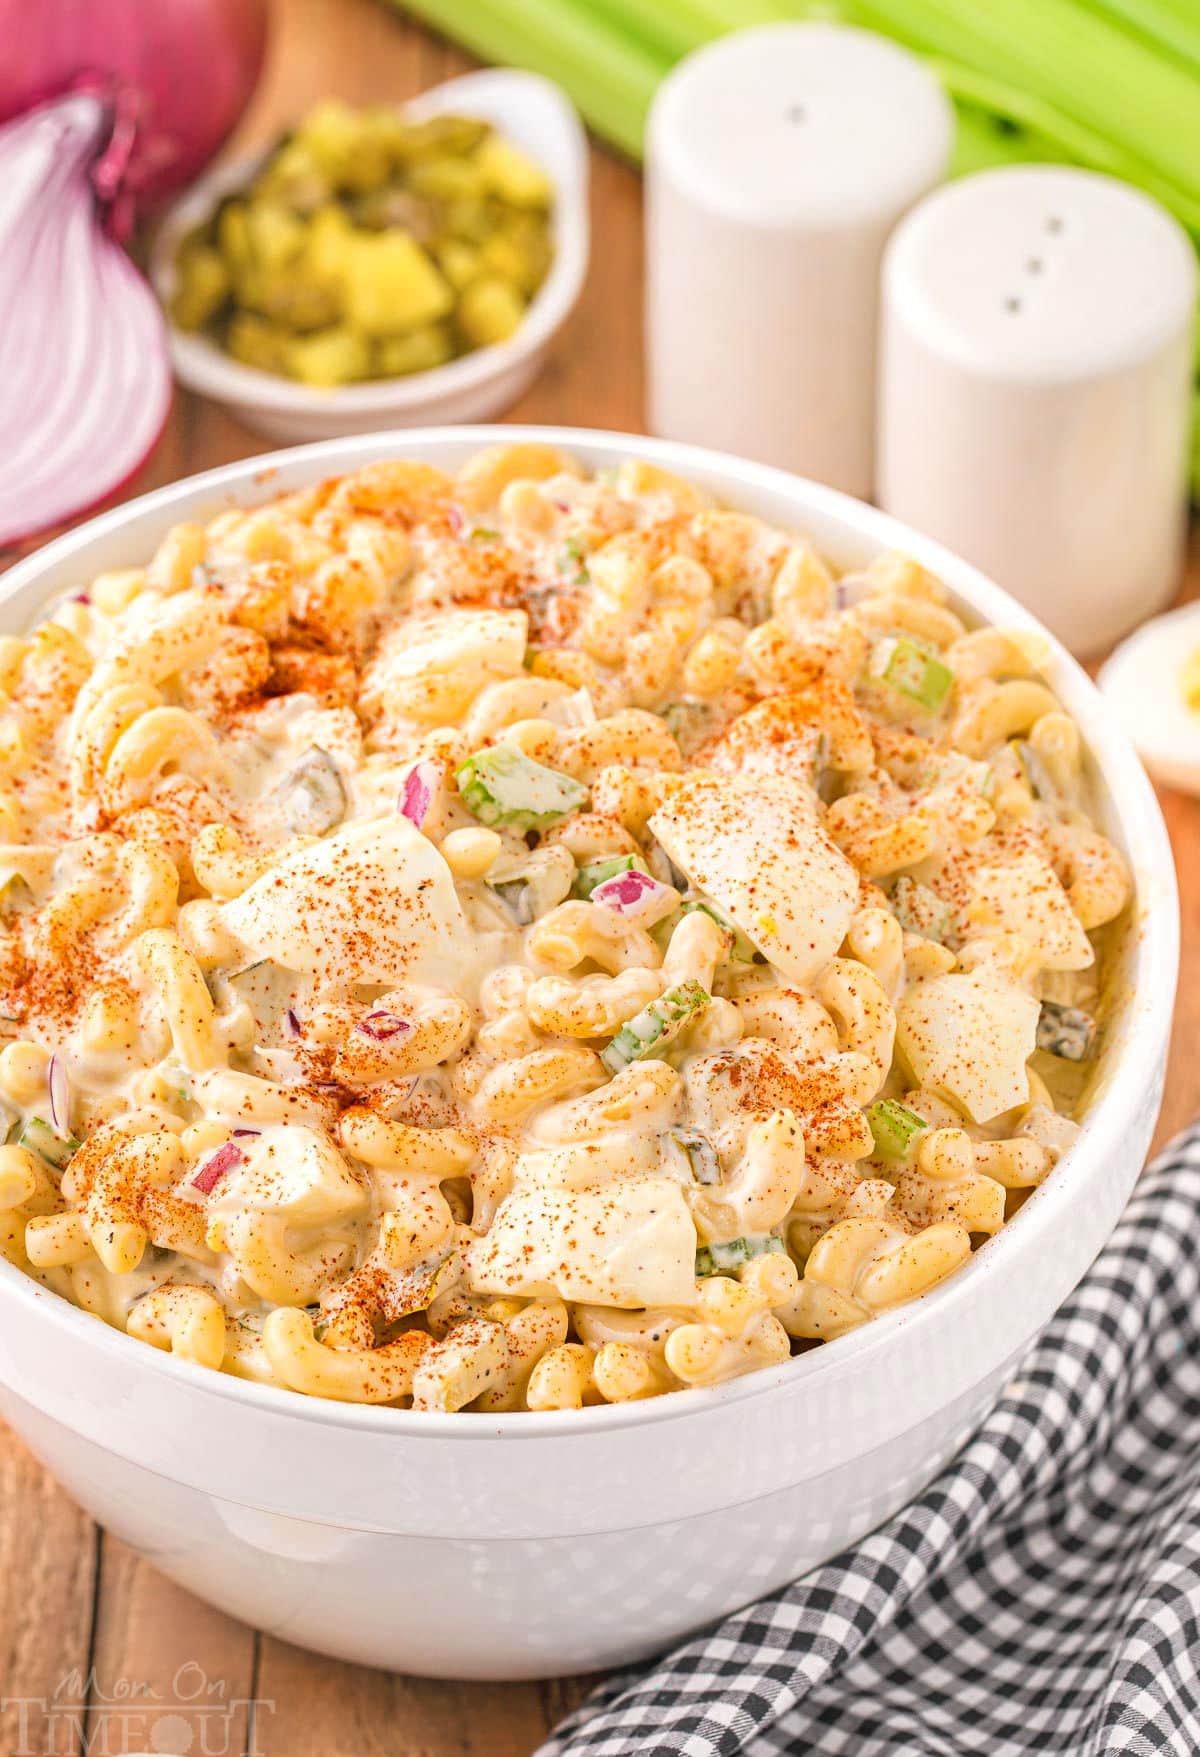 deviled egg macaroni salad in a white bowl topped with paprika. red onion, pickles and celery can be seen in the background.